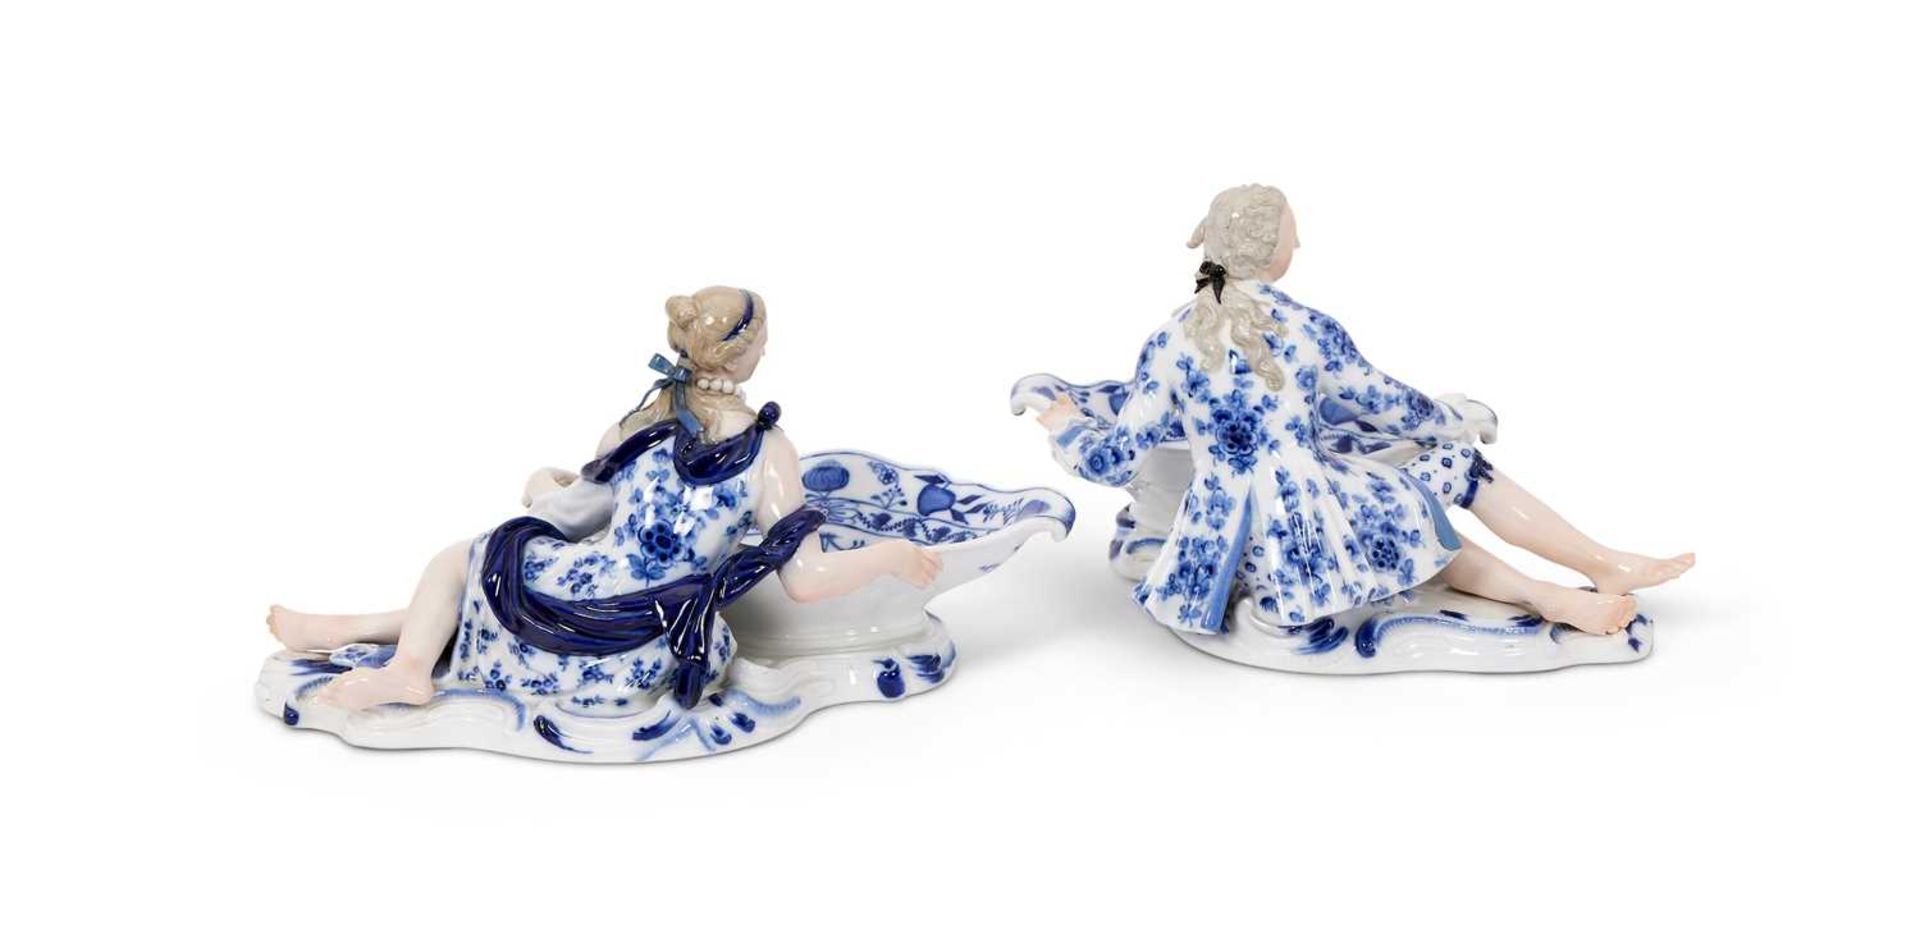 MEISSEN: A PAIR OF LATE 19TH CENTURY BLUE ONION PATTERN FIGURAL SWEET MEAT DISHES - Image 2 of 3